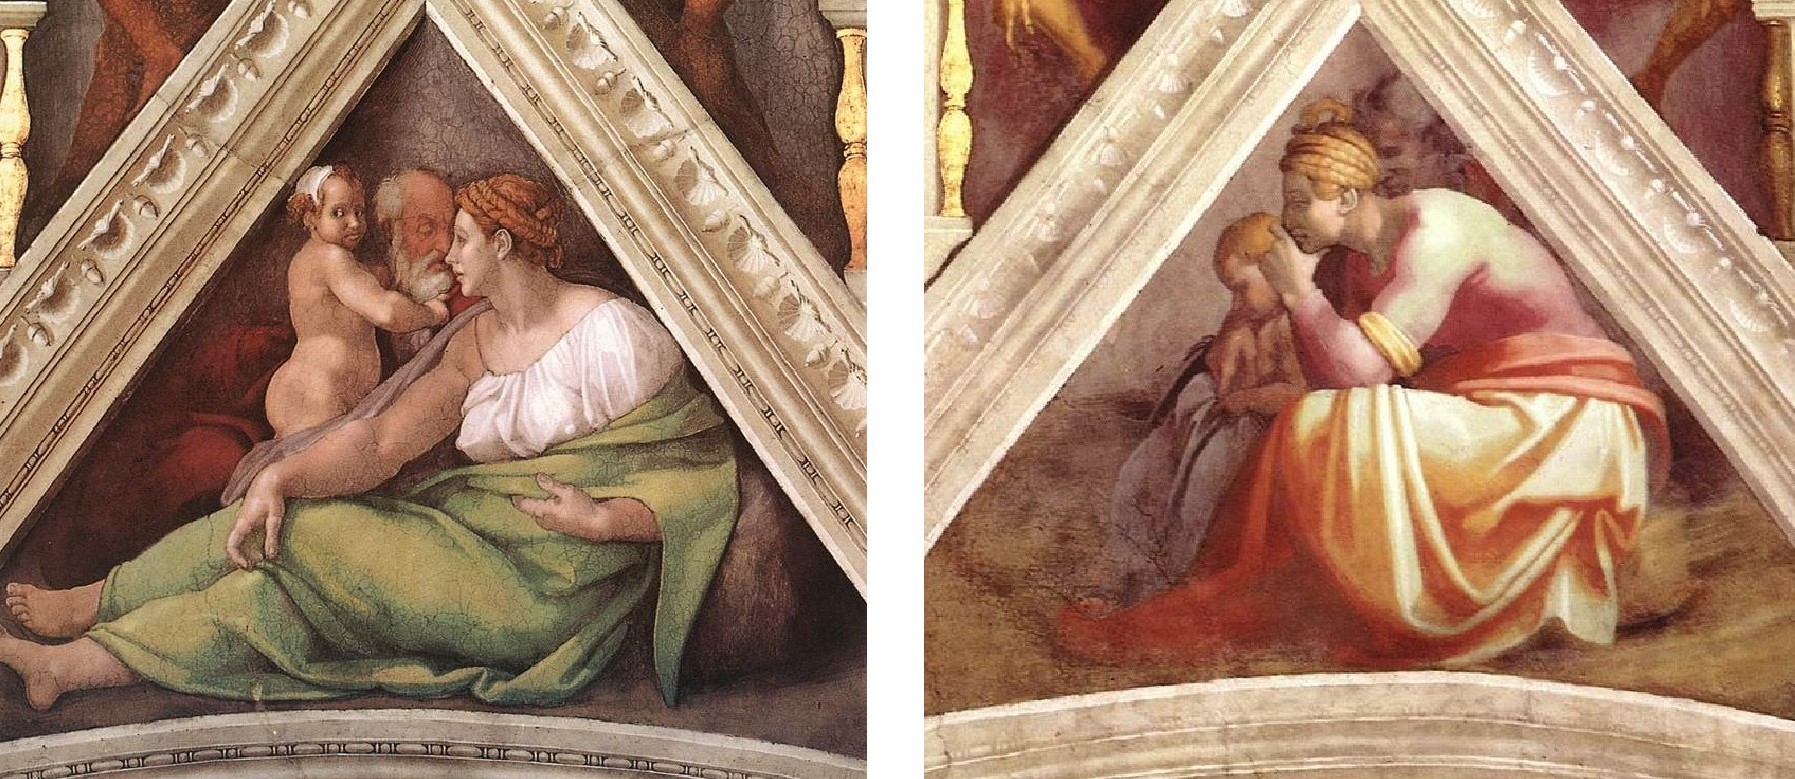 Virtual no more - real Michelangelo awes again in Vatican Museums